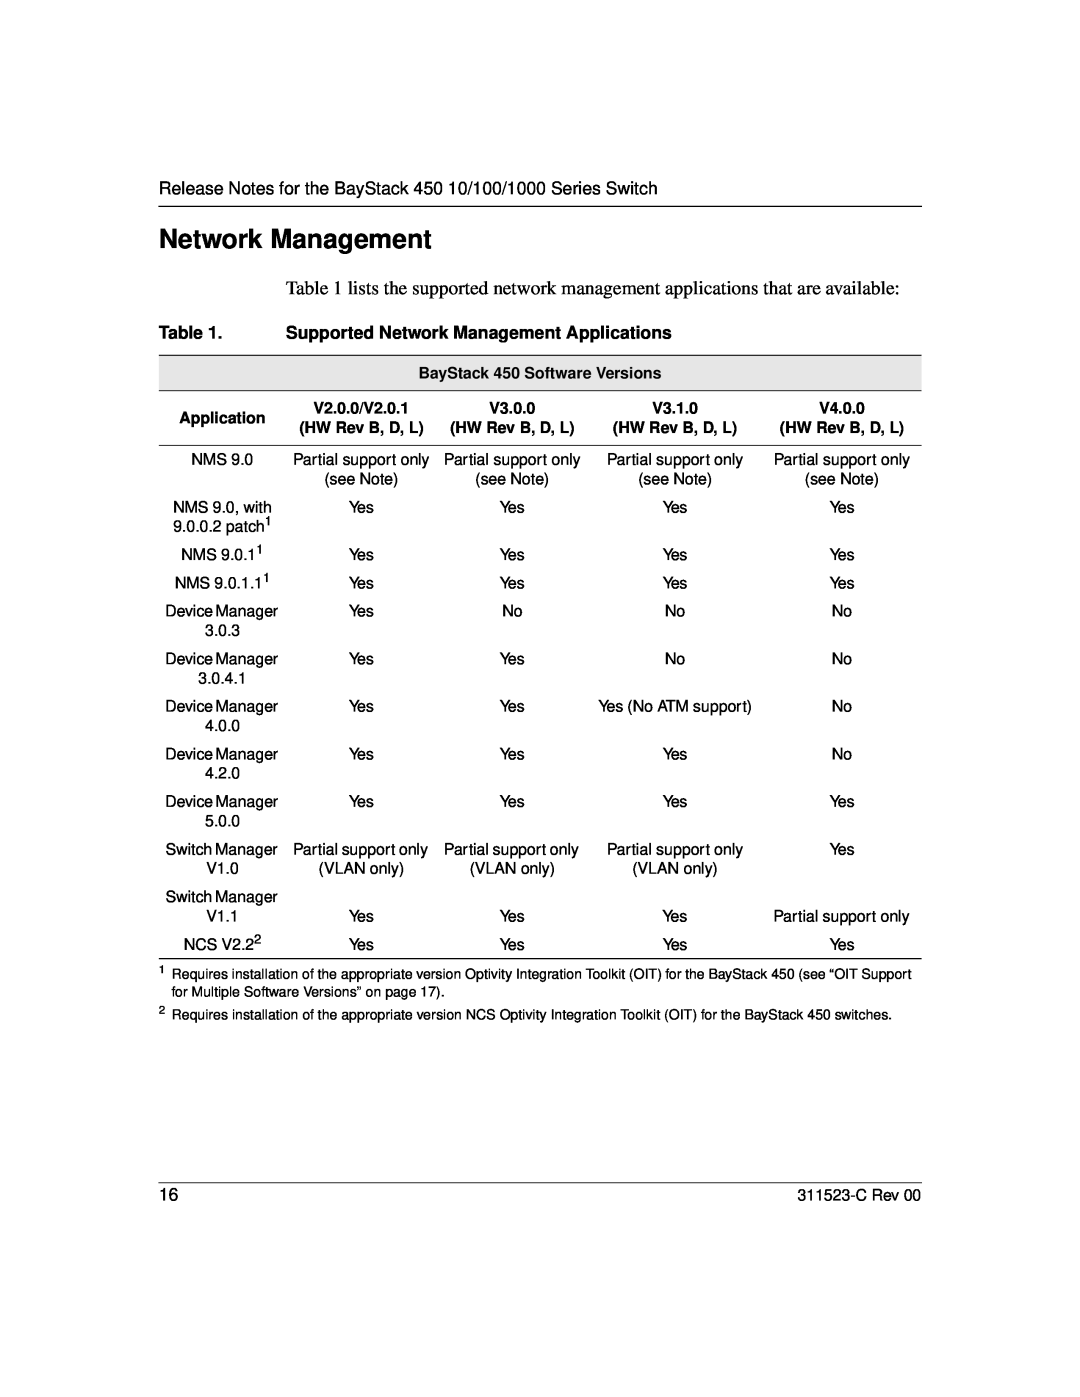 Nortel Networks manual Network Management, Release Notes for the BayStack 450 10/100/1000 Series Switch, Application 